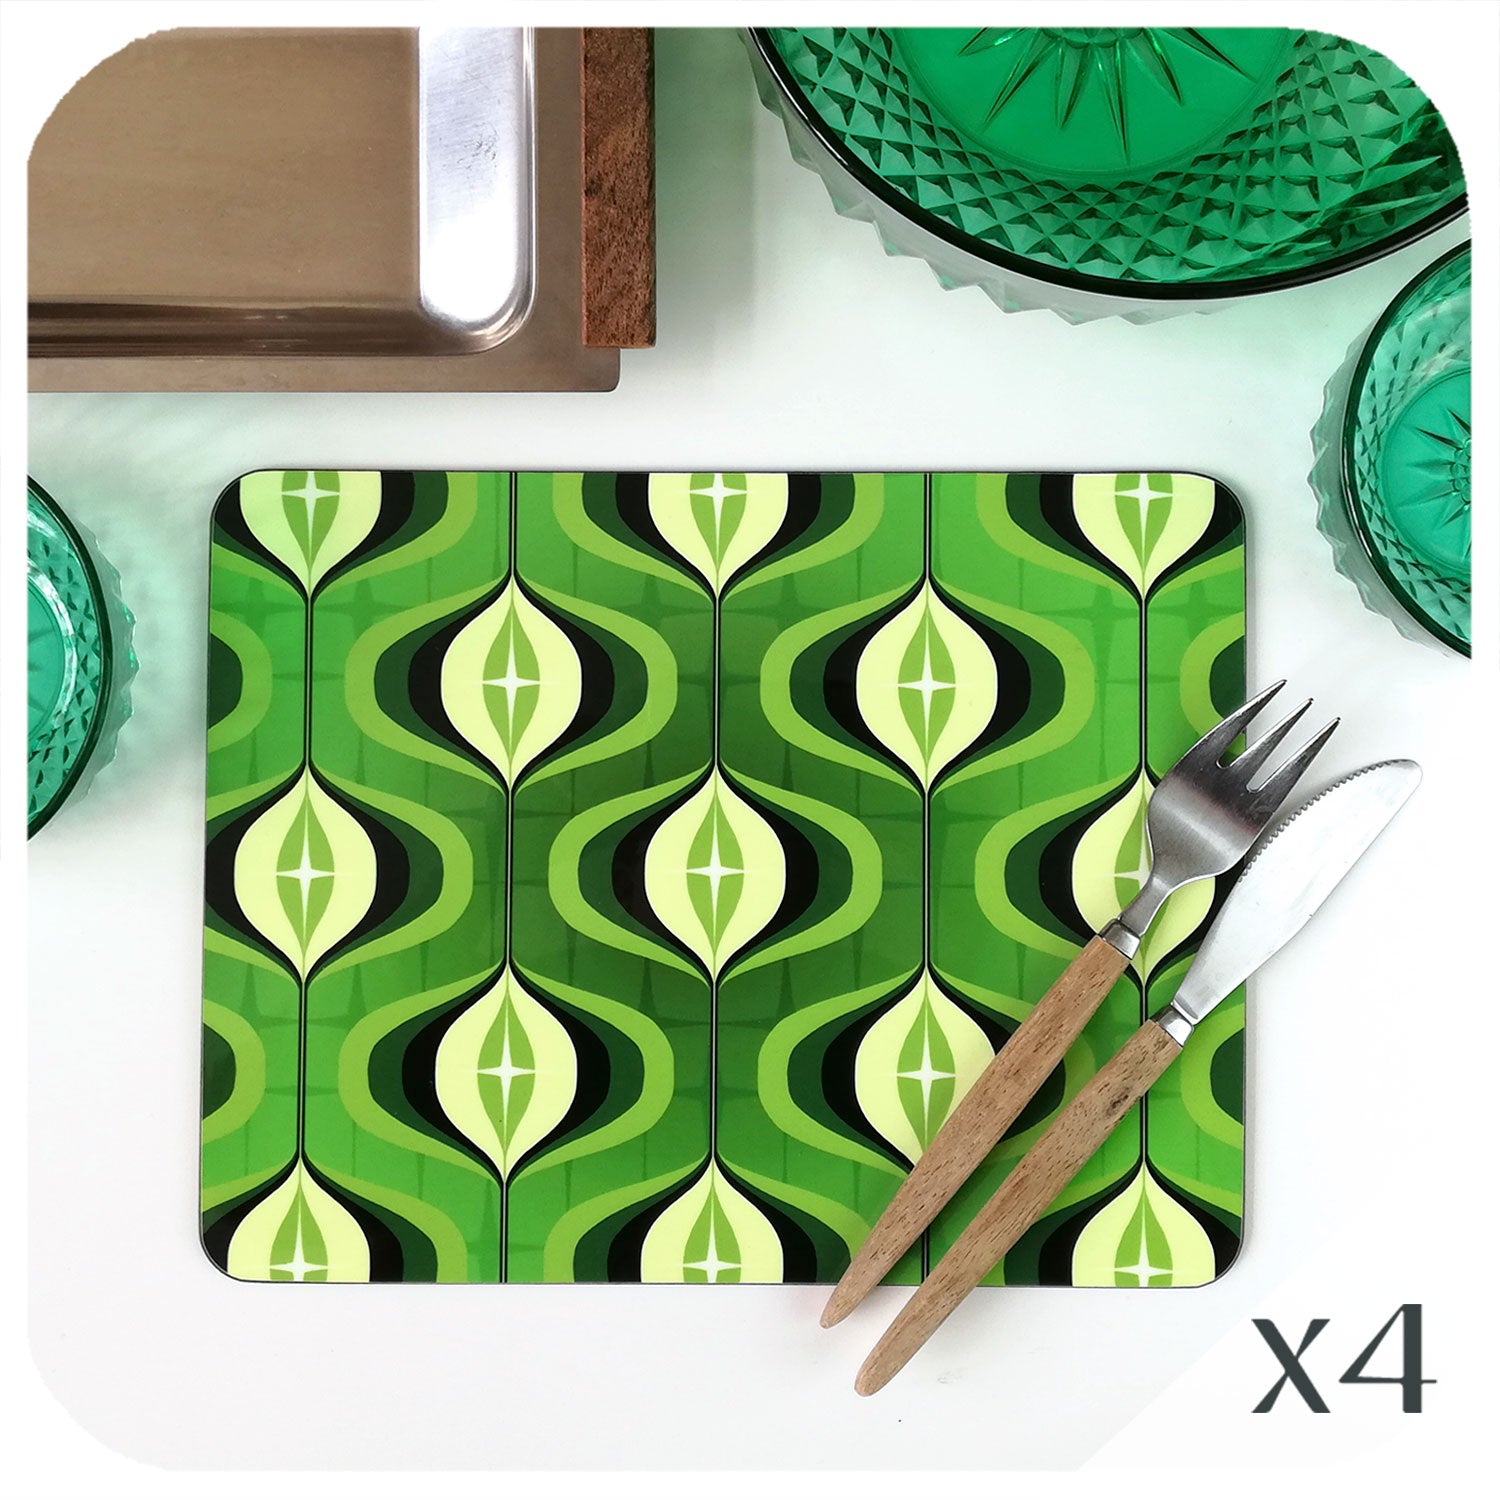 PLACEMATS, SETS OF 4